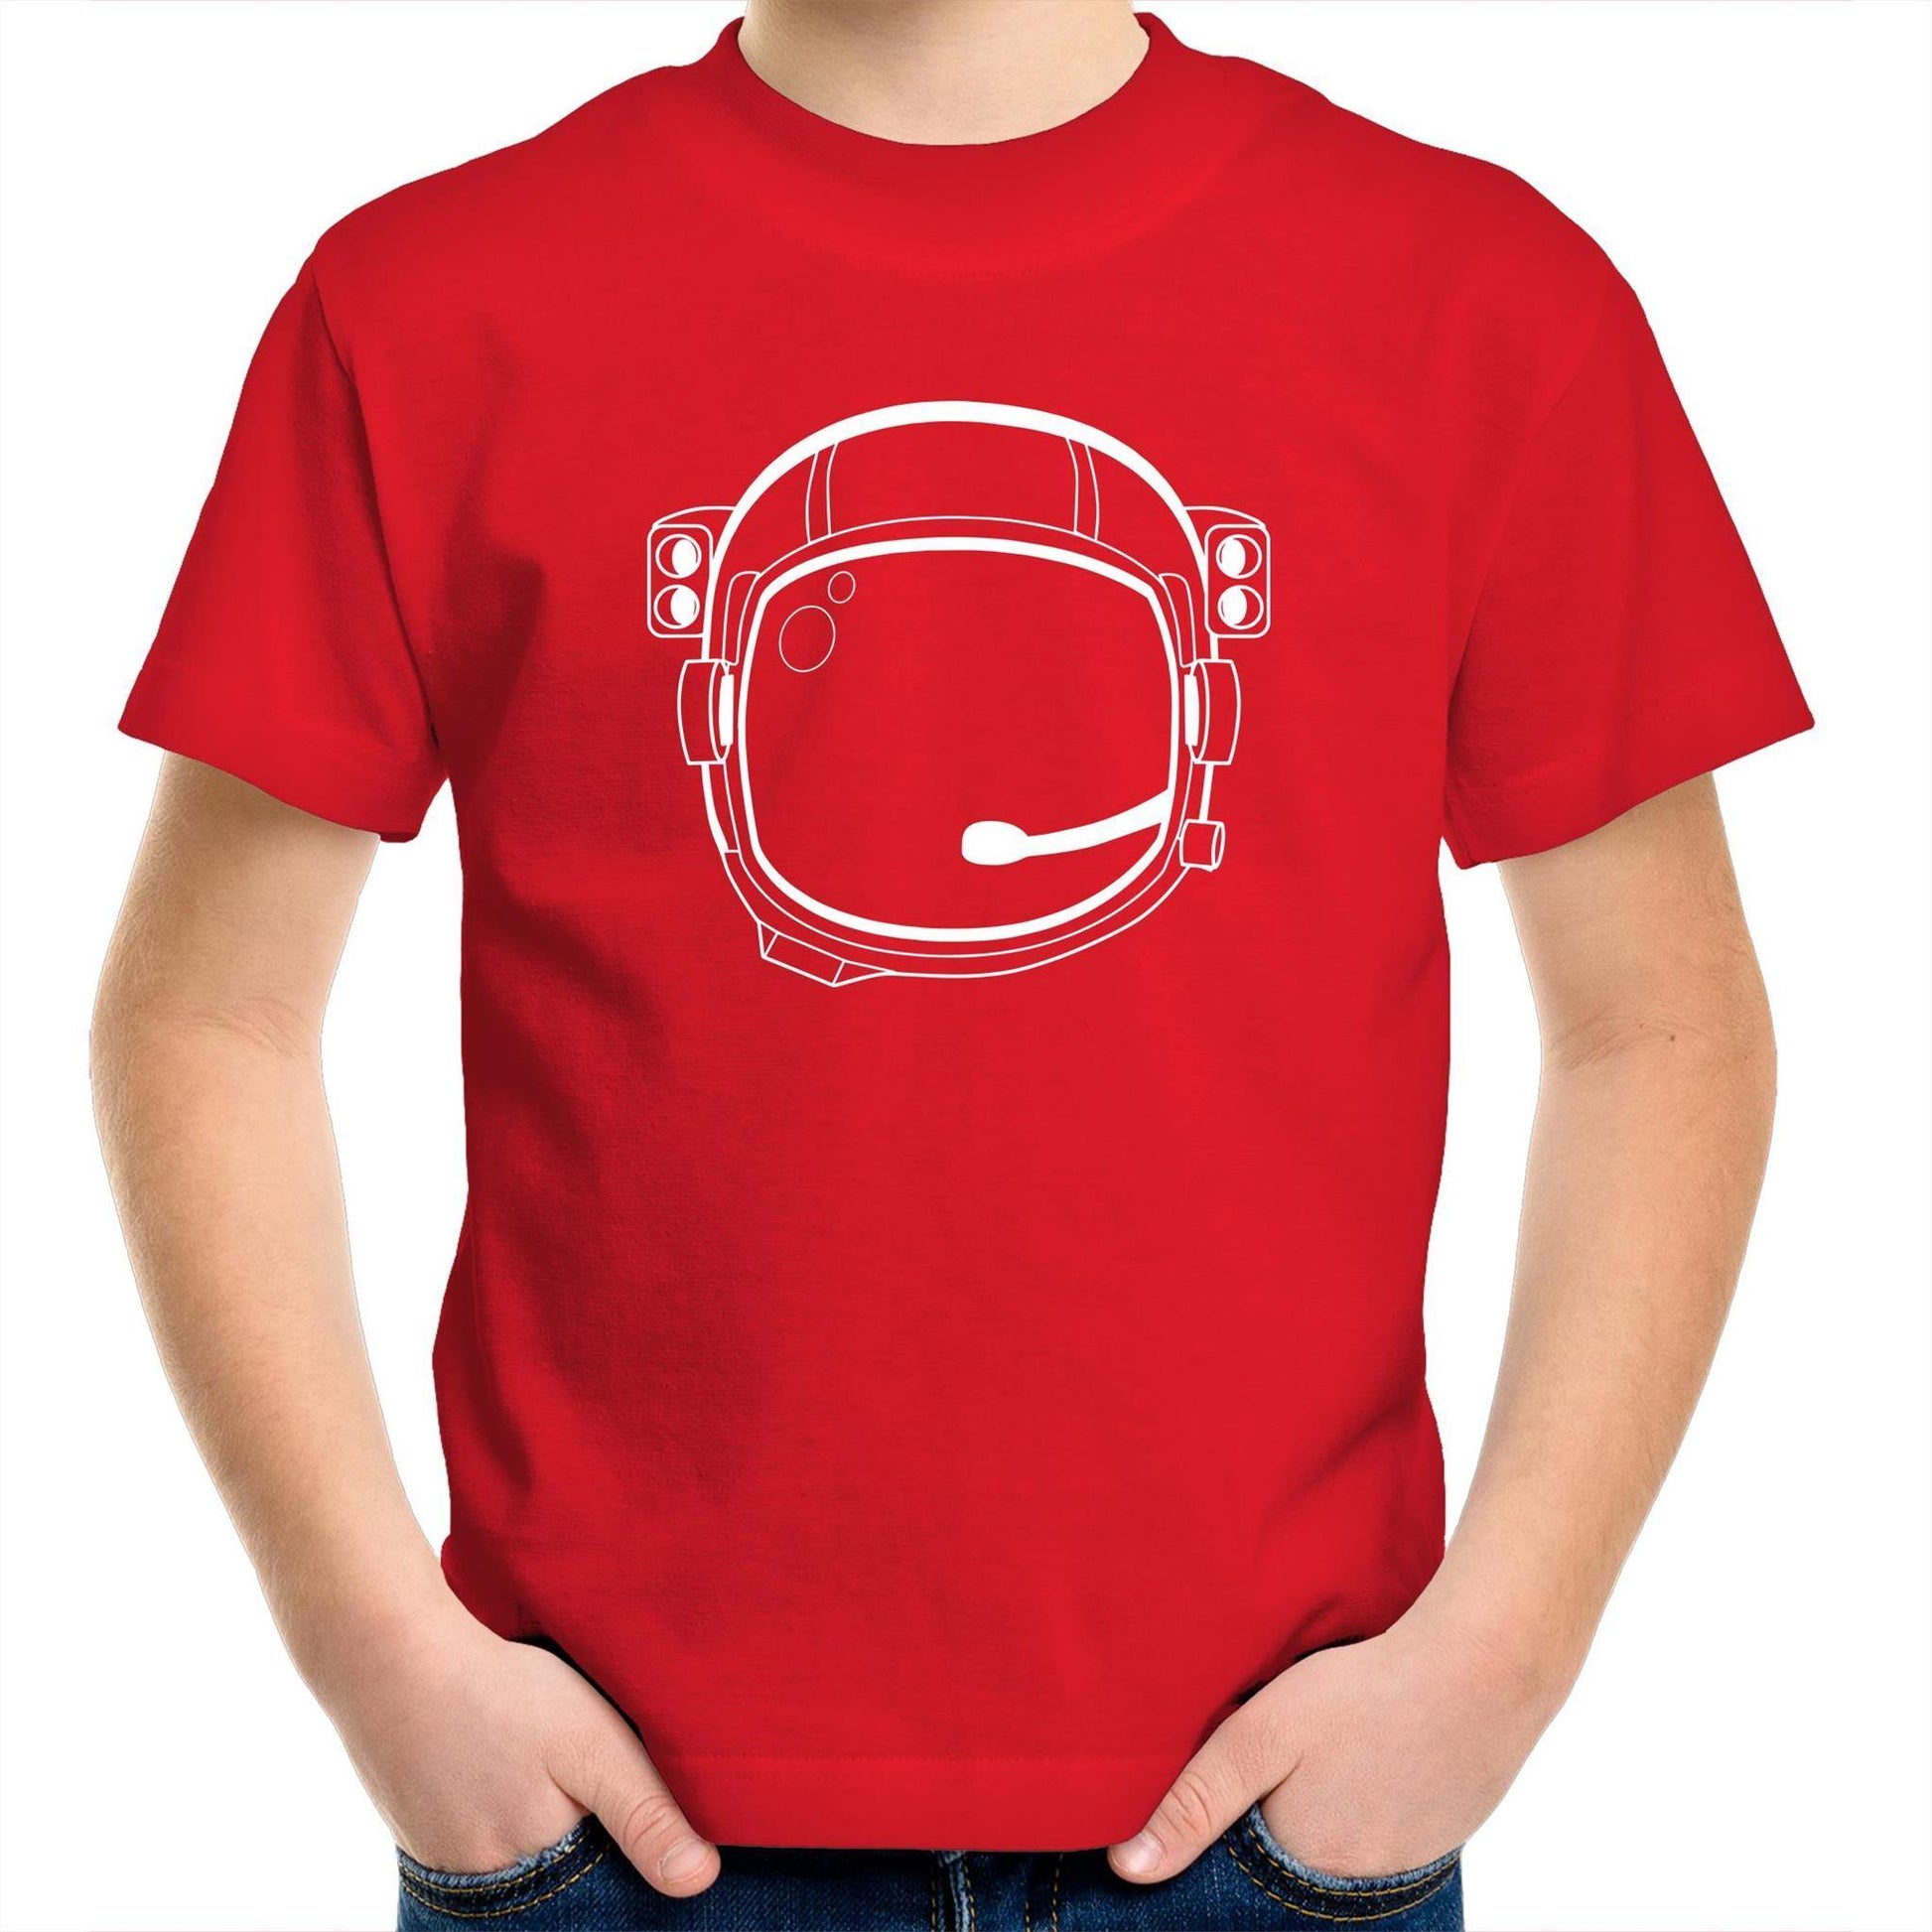 Astronaut Helmet - Kids Youth Crew T-Shirt Red Kids Youth T-shirt Space